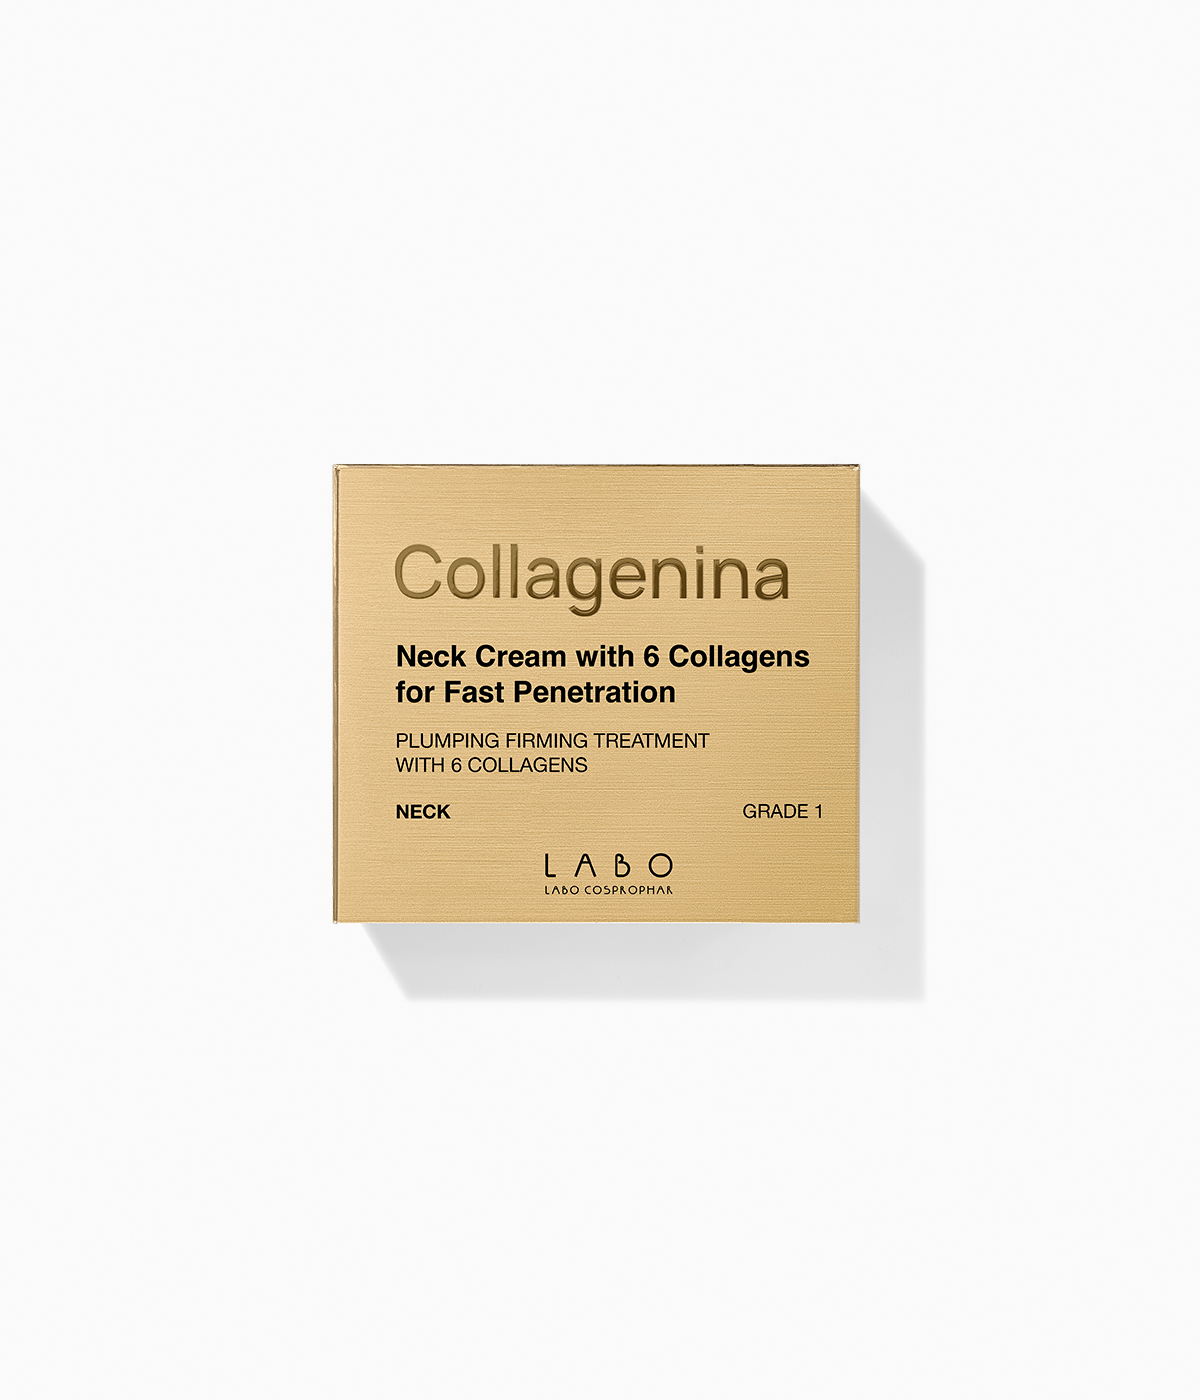 Collagenina Neck Cream with 6 Collagen for Fast Penetration